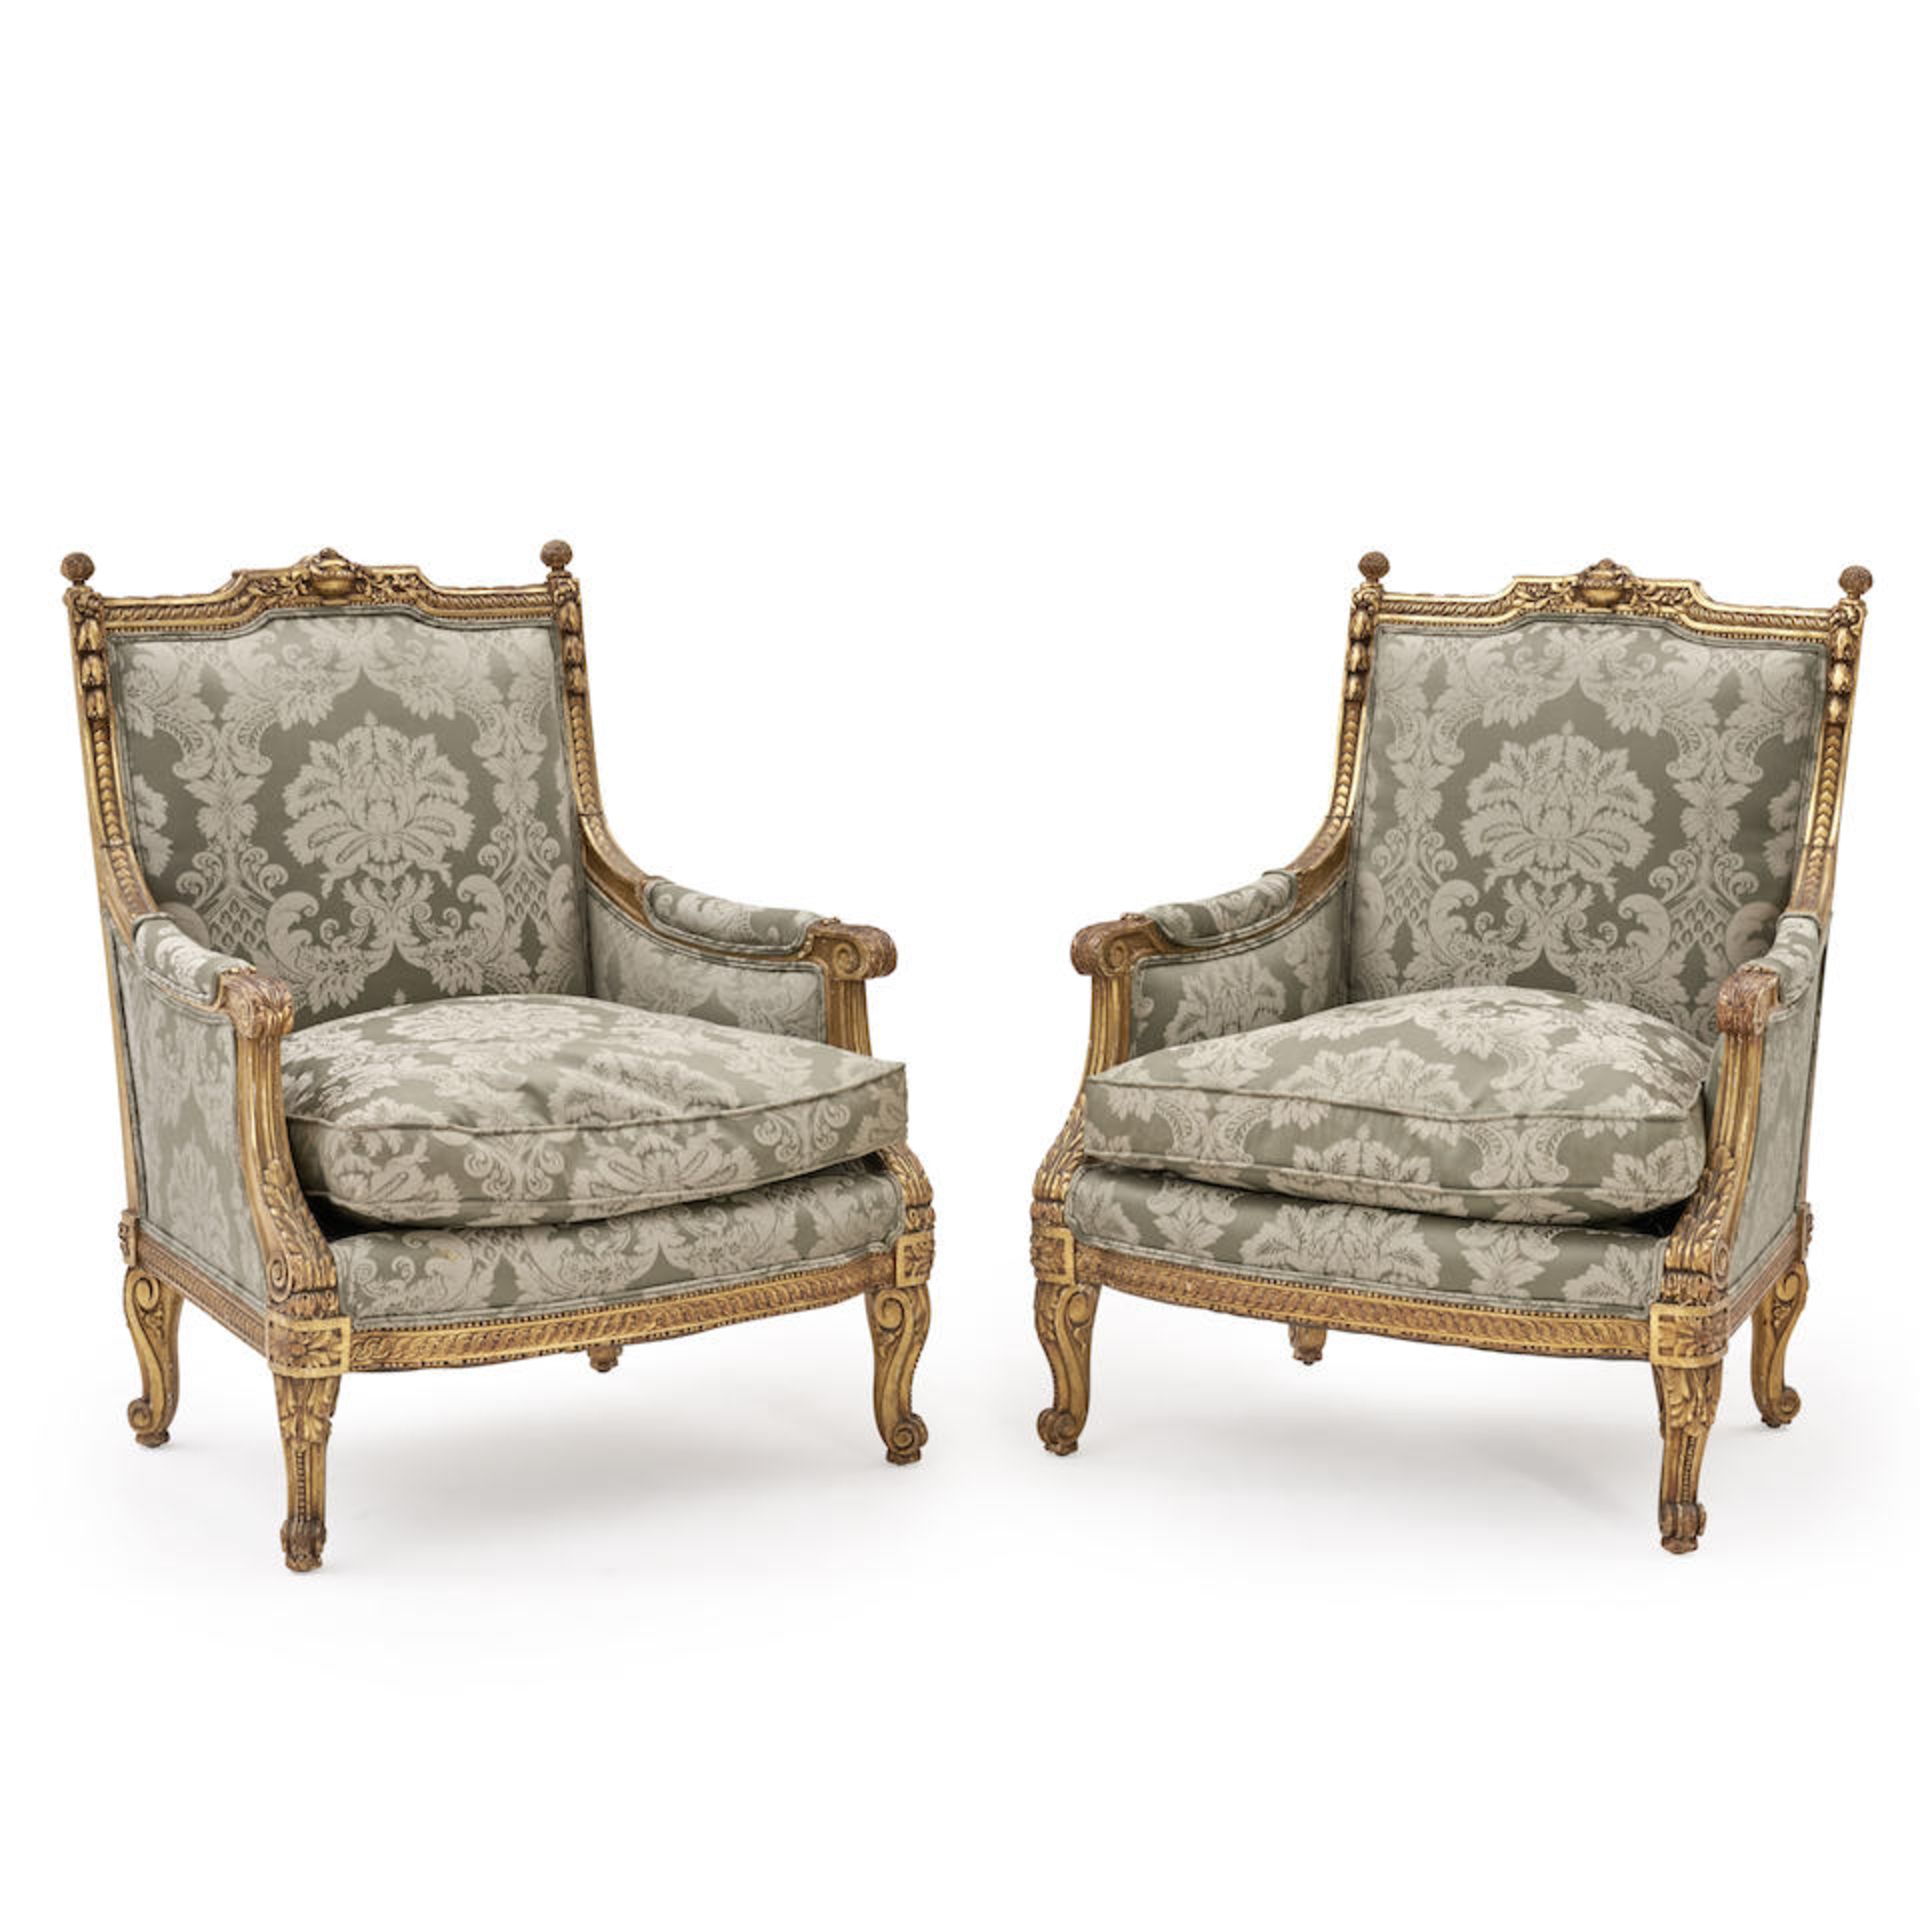 Pair of Louis XVI-style Bergeres, France, 19th century,